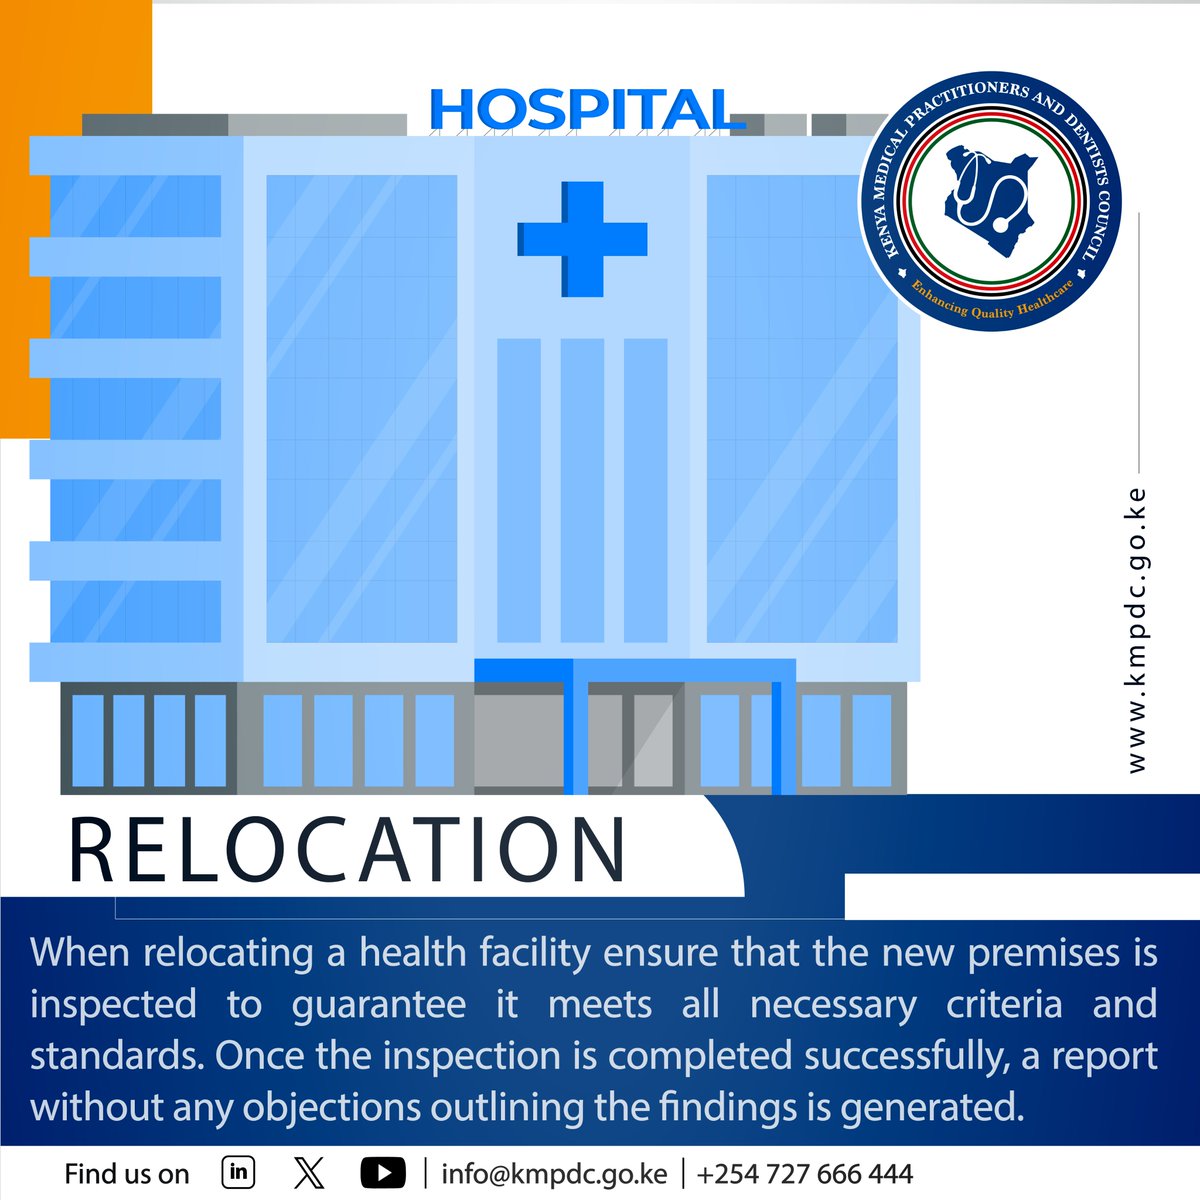 When relocating a health facility ensure that the new premises is inspected to guarantee it meets all necessary criteria and standards. Once the inspection is completed successfully, a report without any objections outlining the findings is generated. In addition to the